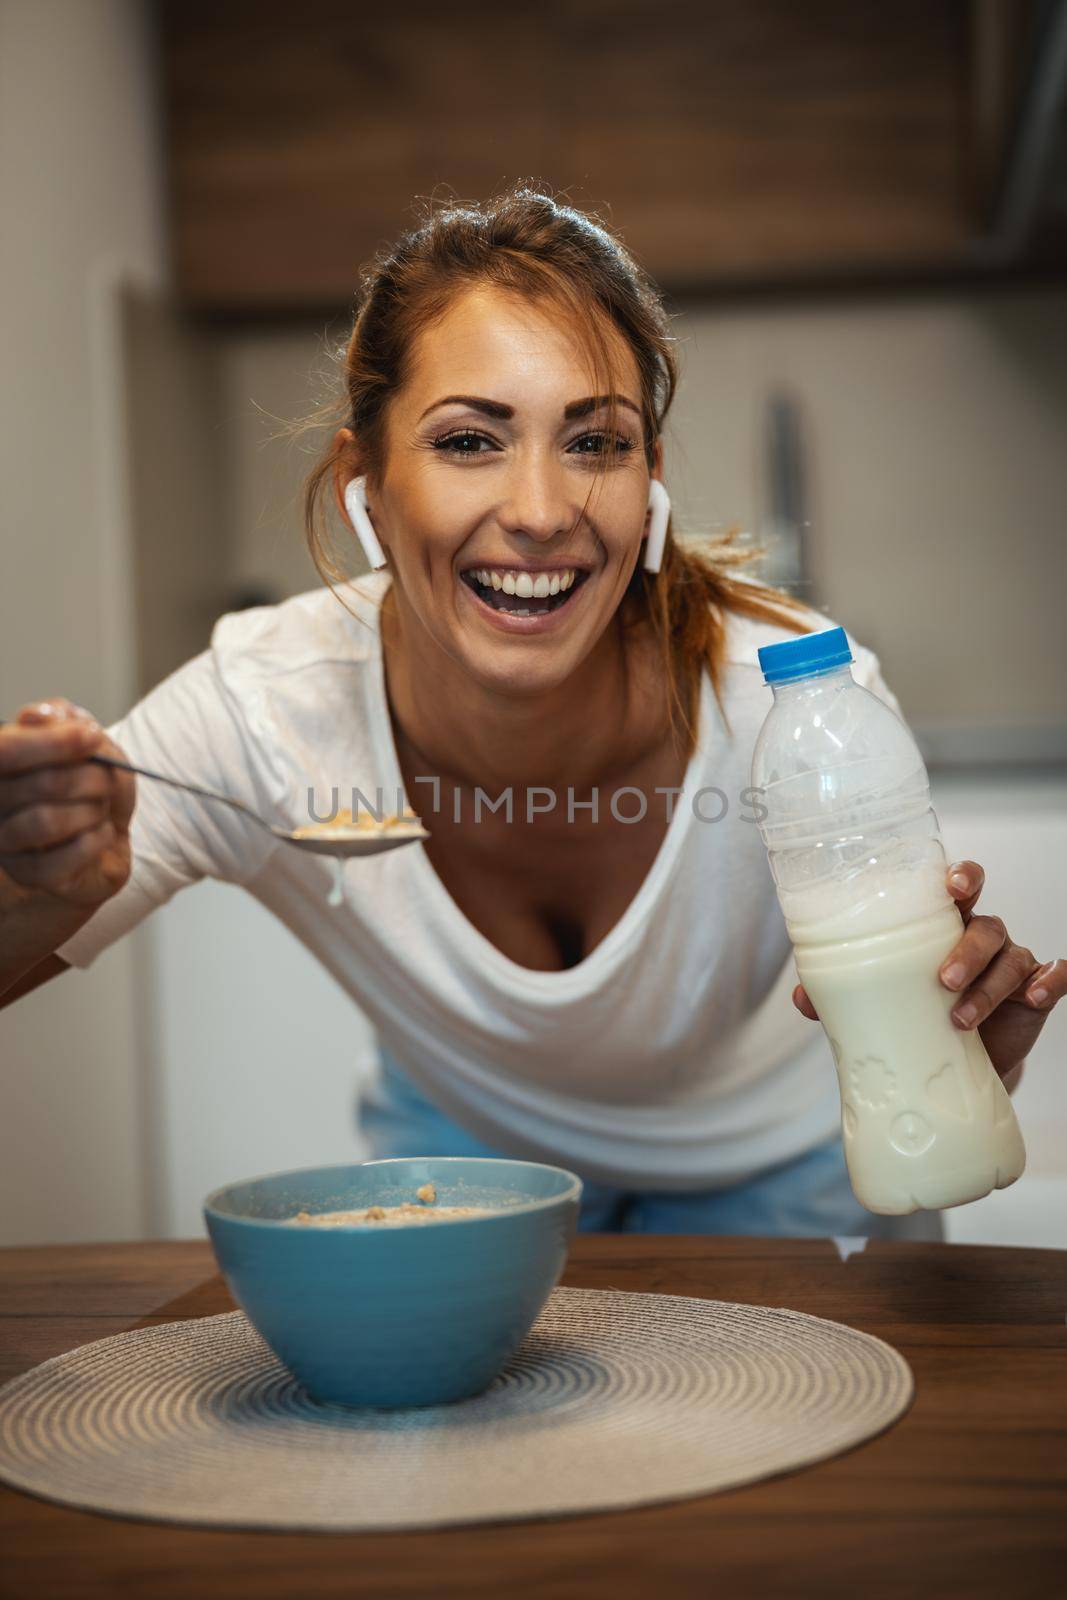 Beautiful young smiling woman is eating her healthy breakfast in her kitchen and listening music. Looking at camera.